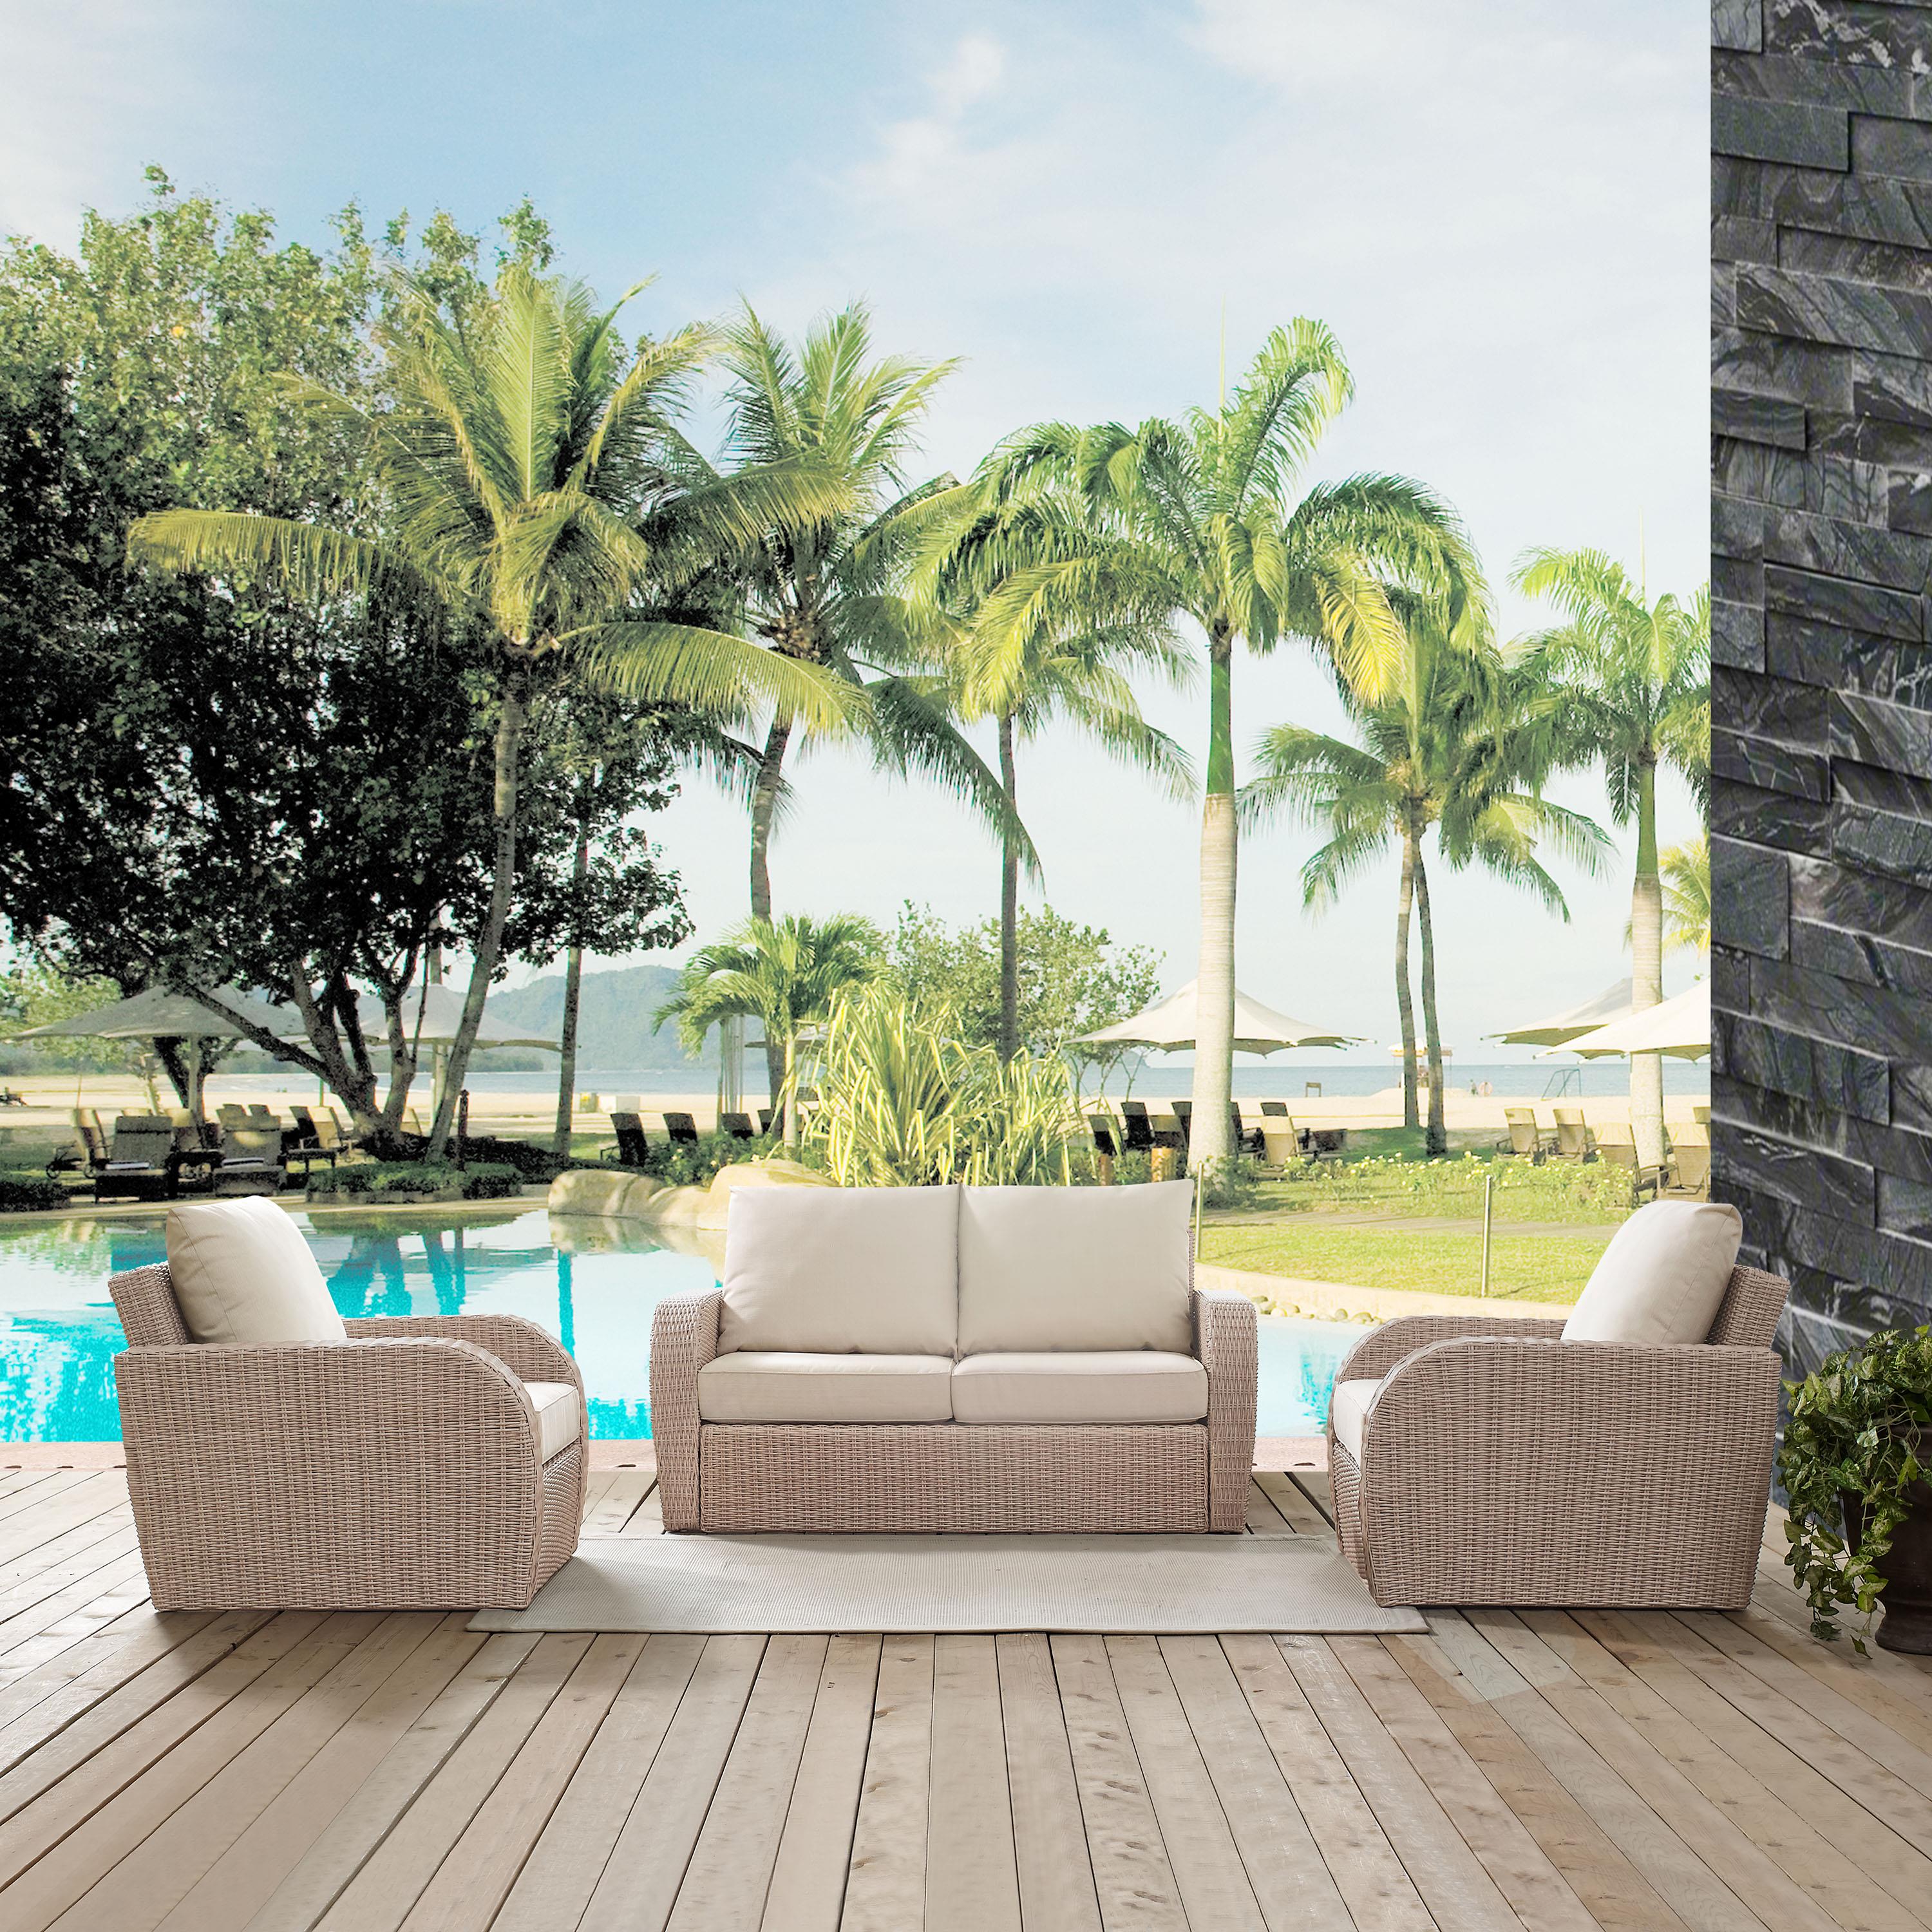 Crosley Furniture St Augustine 3 Pc Outdoor Wicker Seating Set With Oatmeal Cushion - Loveseat, Two Outdoor Chairs - image 5 of 5